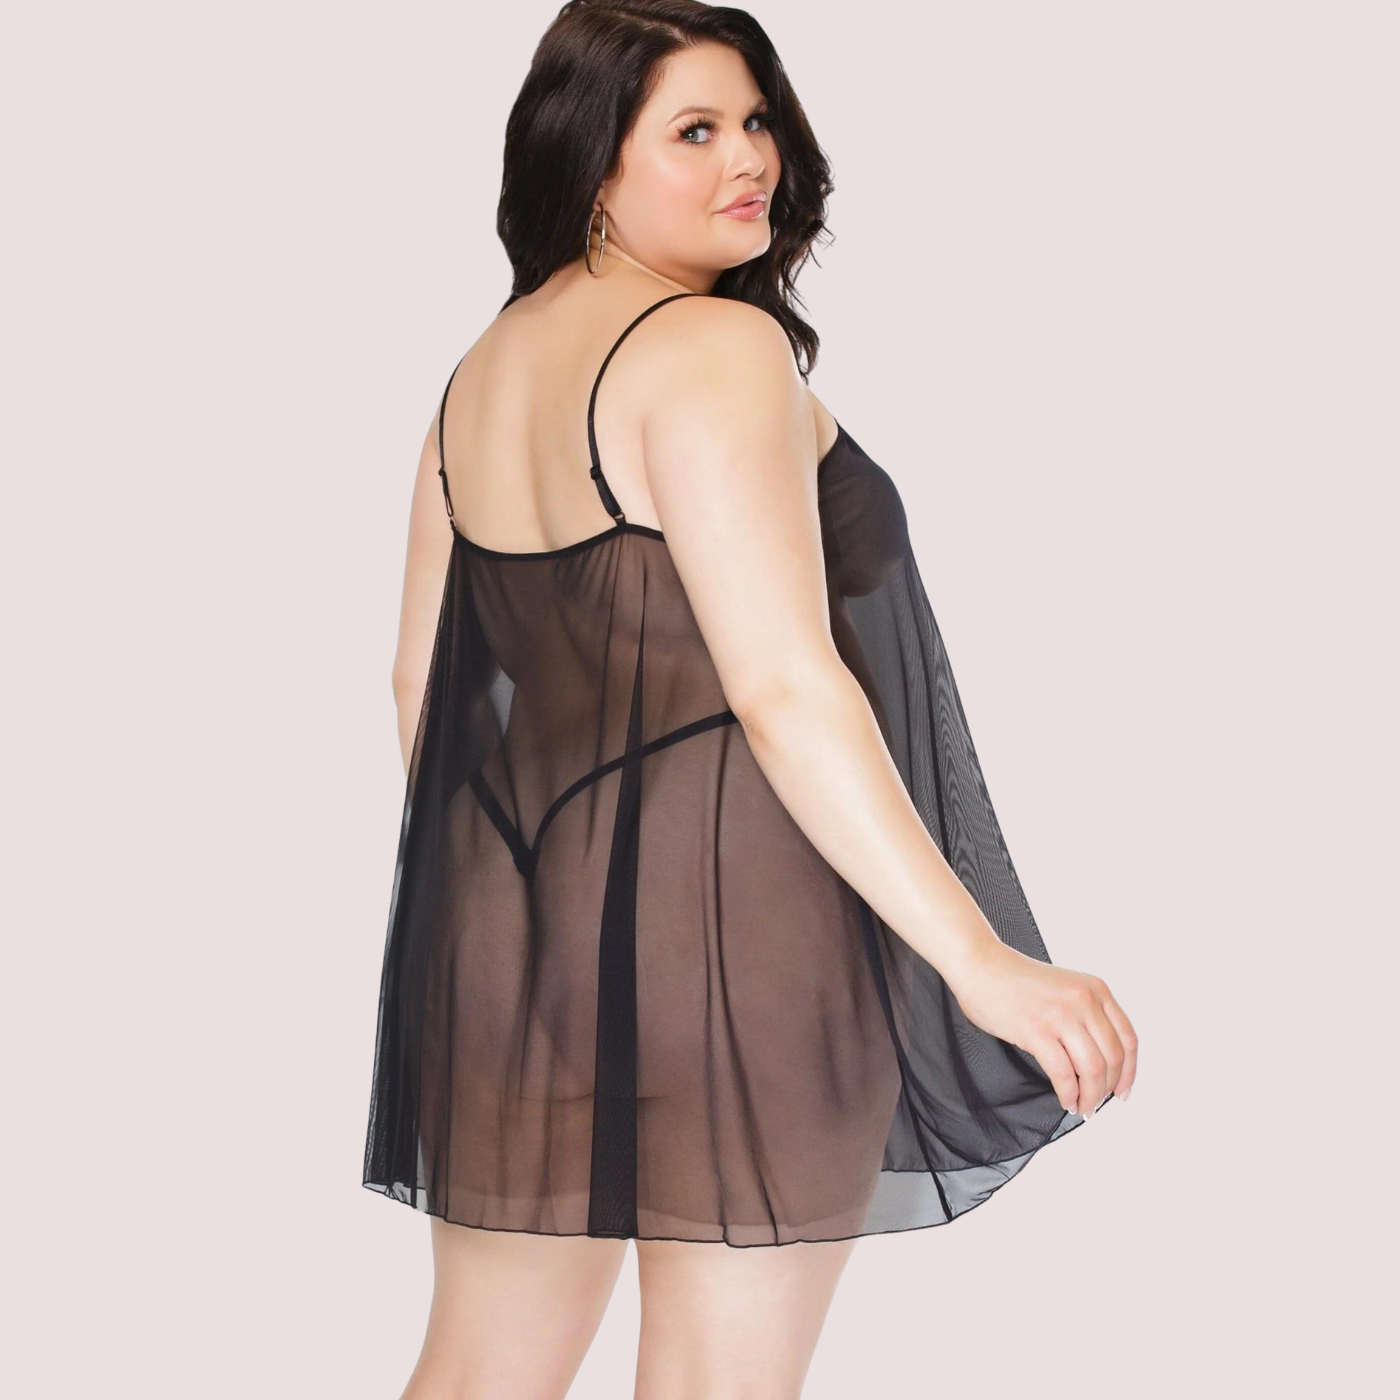 Extra Plus Size Lingerie For Dropshipping- Snazzyway